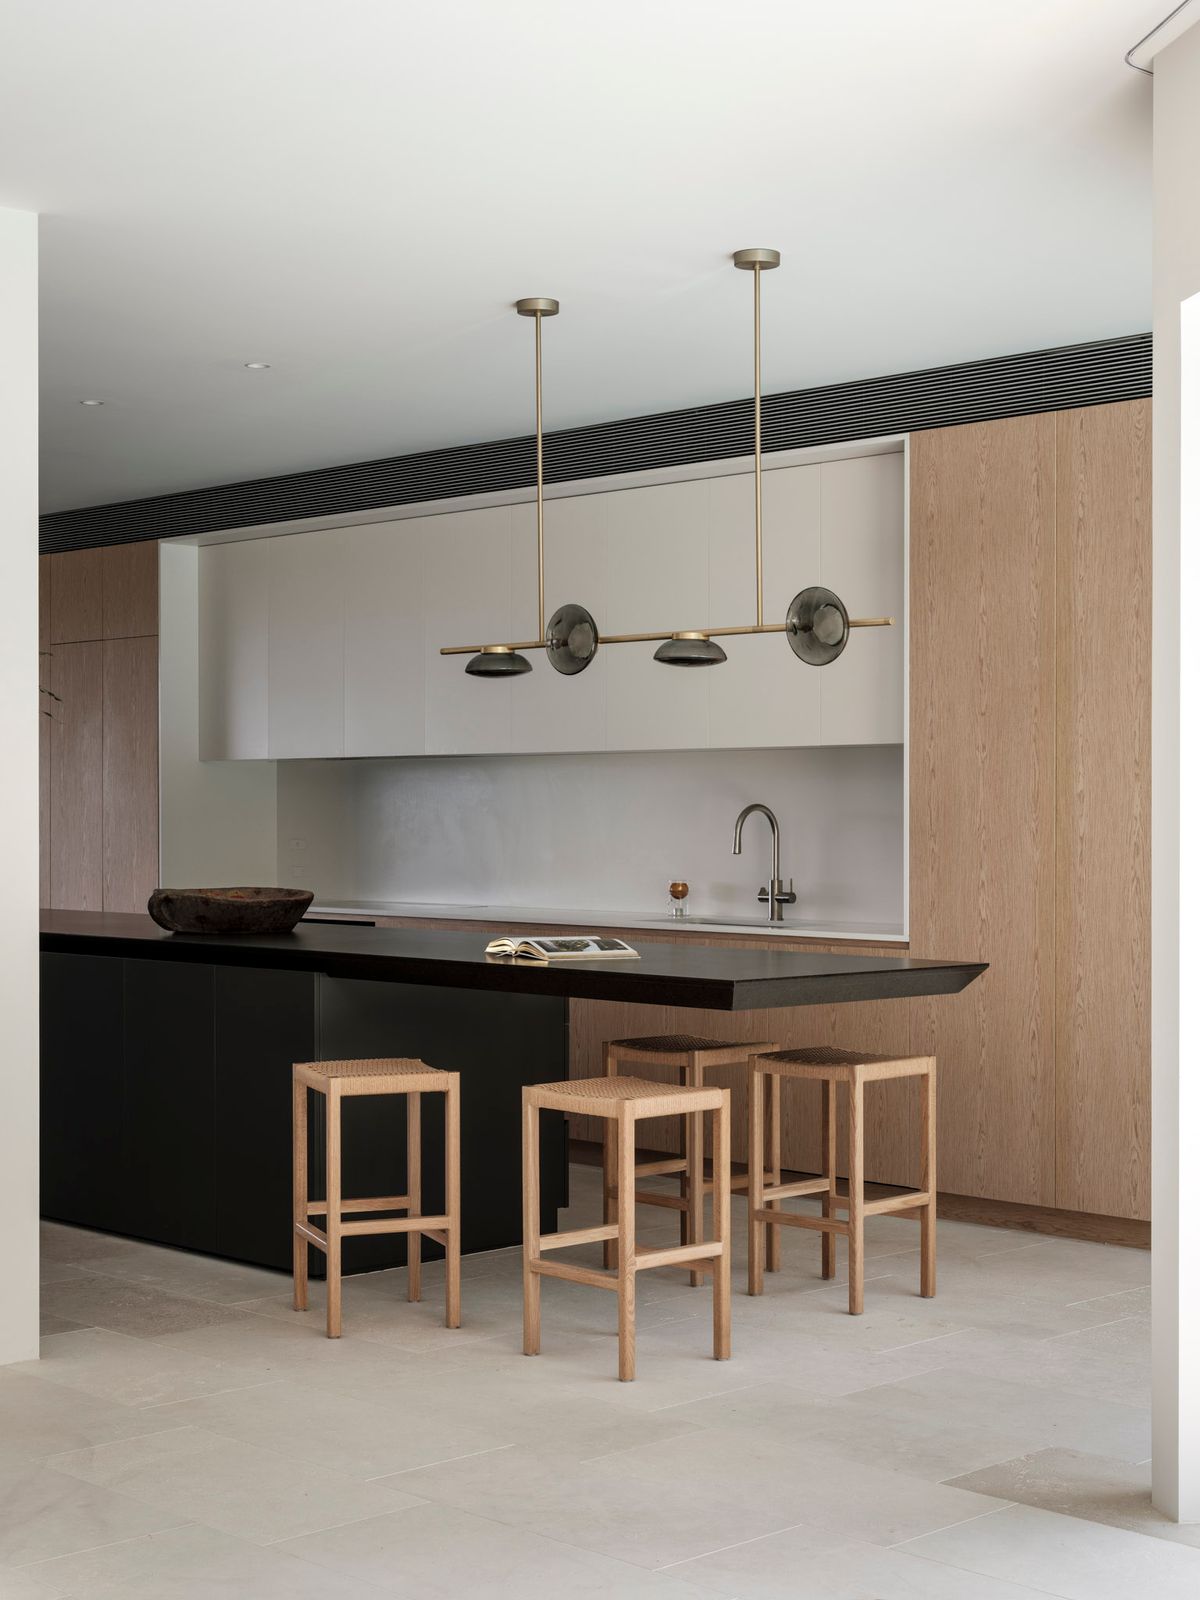 A sleek modern kitchen island design that has a tapered black stone benchtop that is cantilevered to provide a dining space